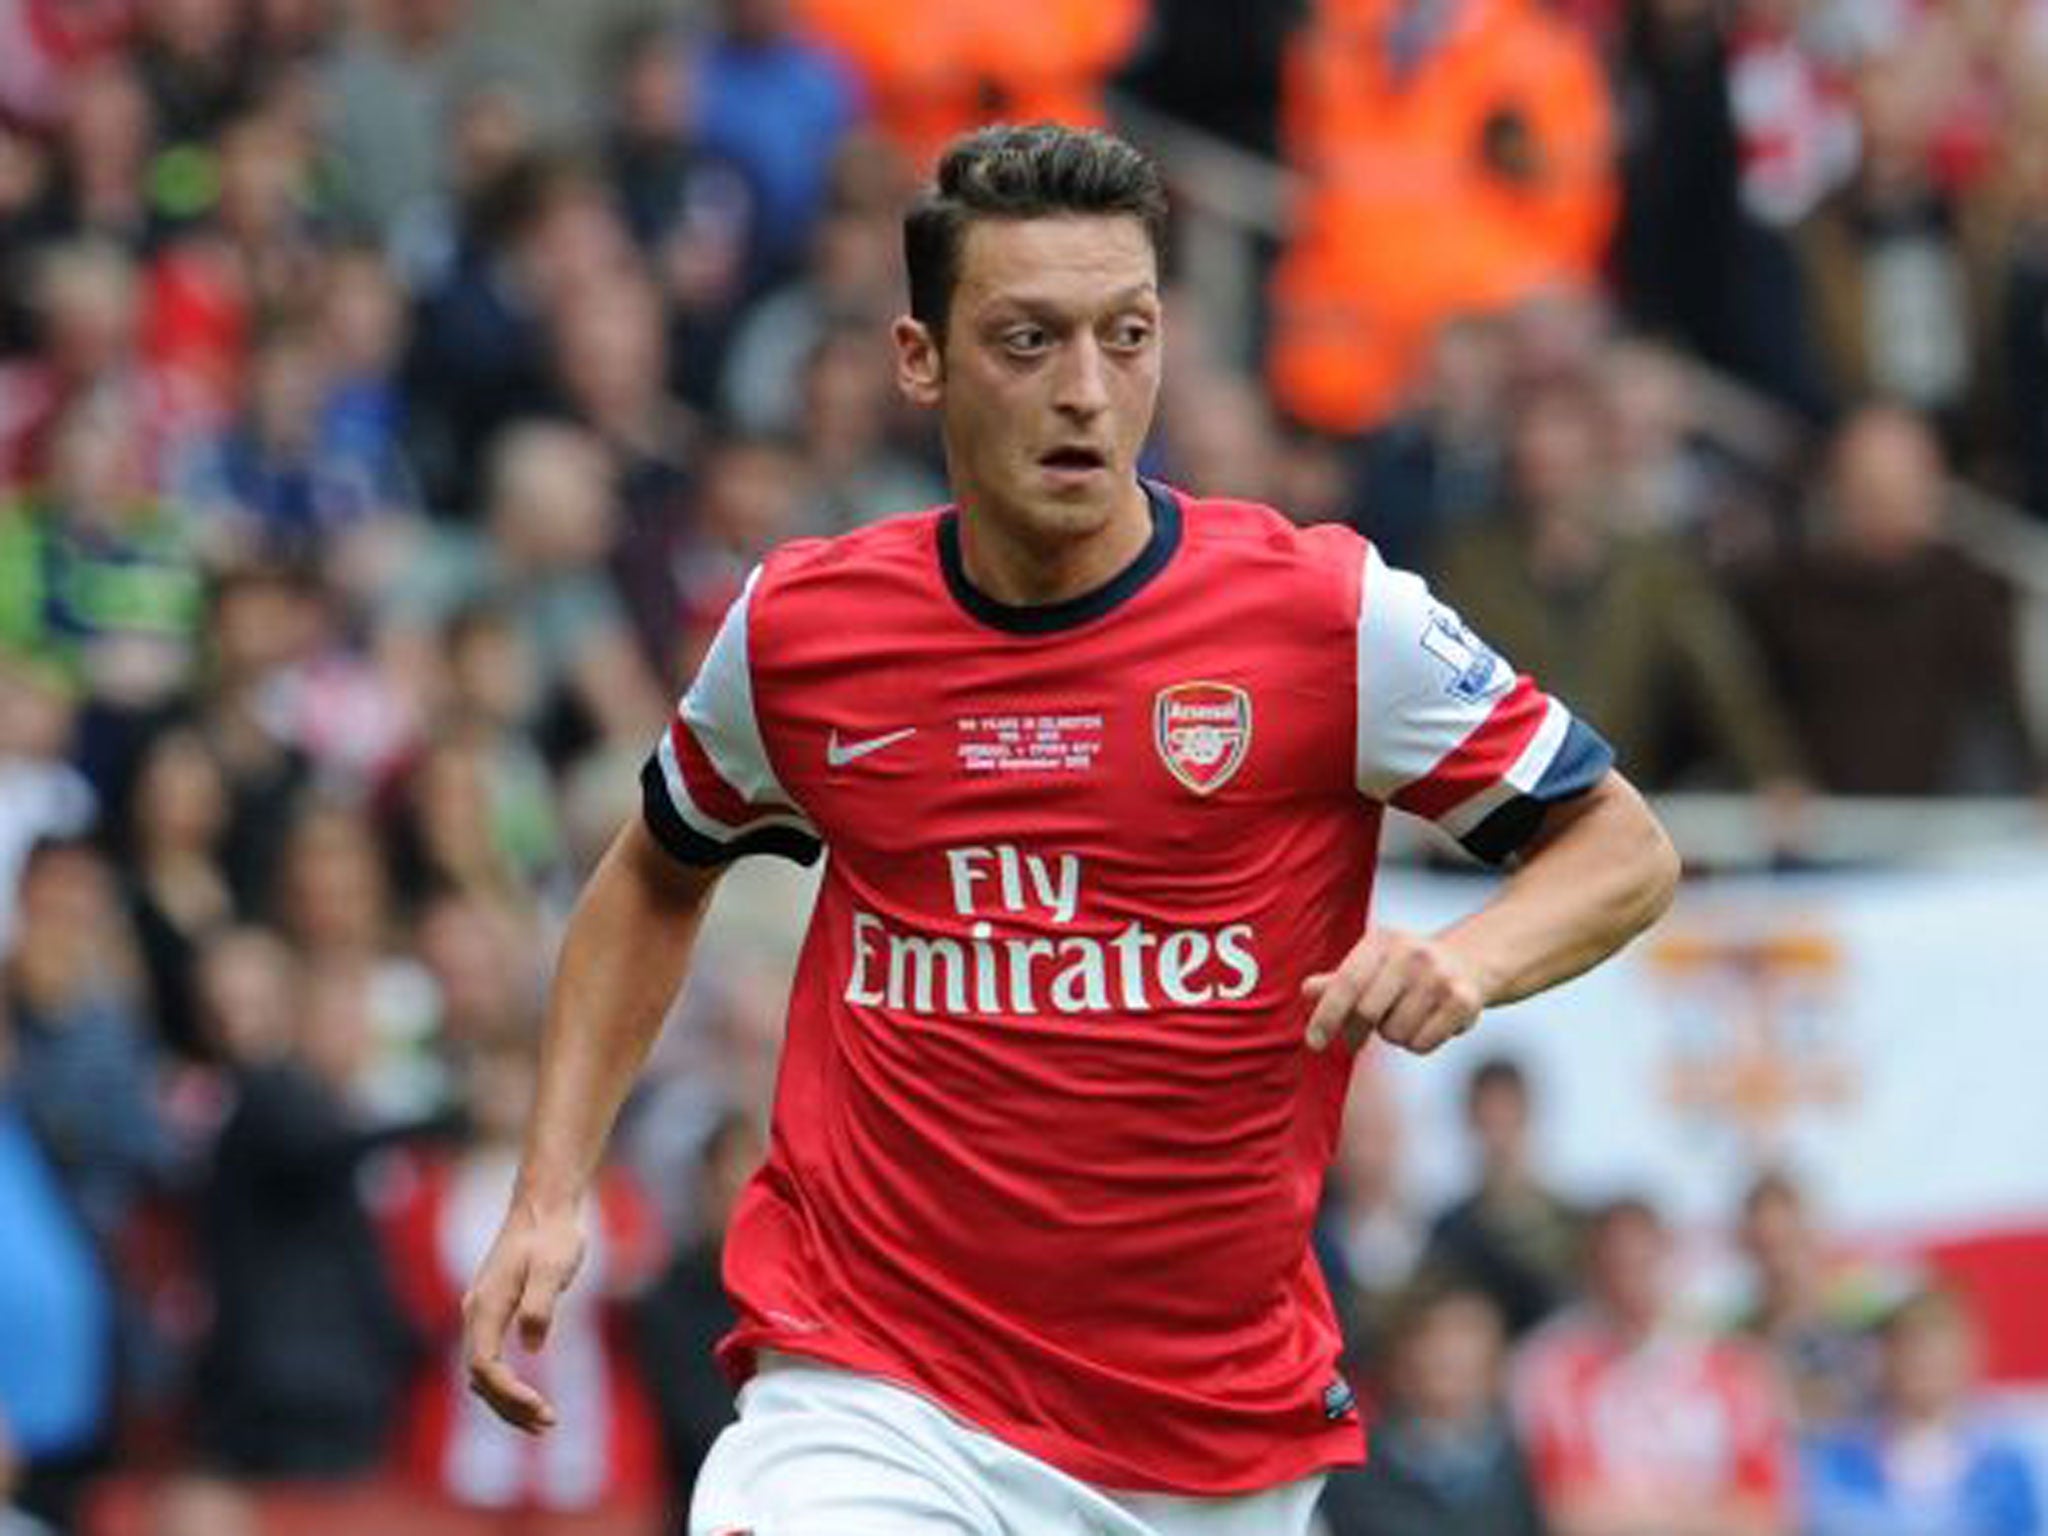 Mesut Ozil, cost a club record fee of £42.5m, means more is expected of Arsenal